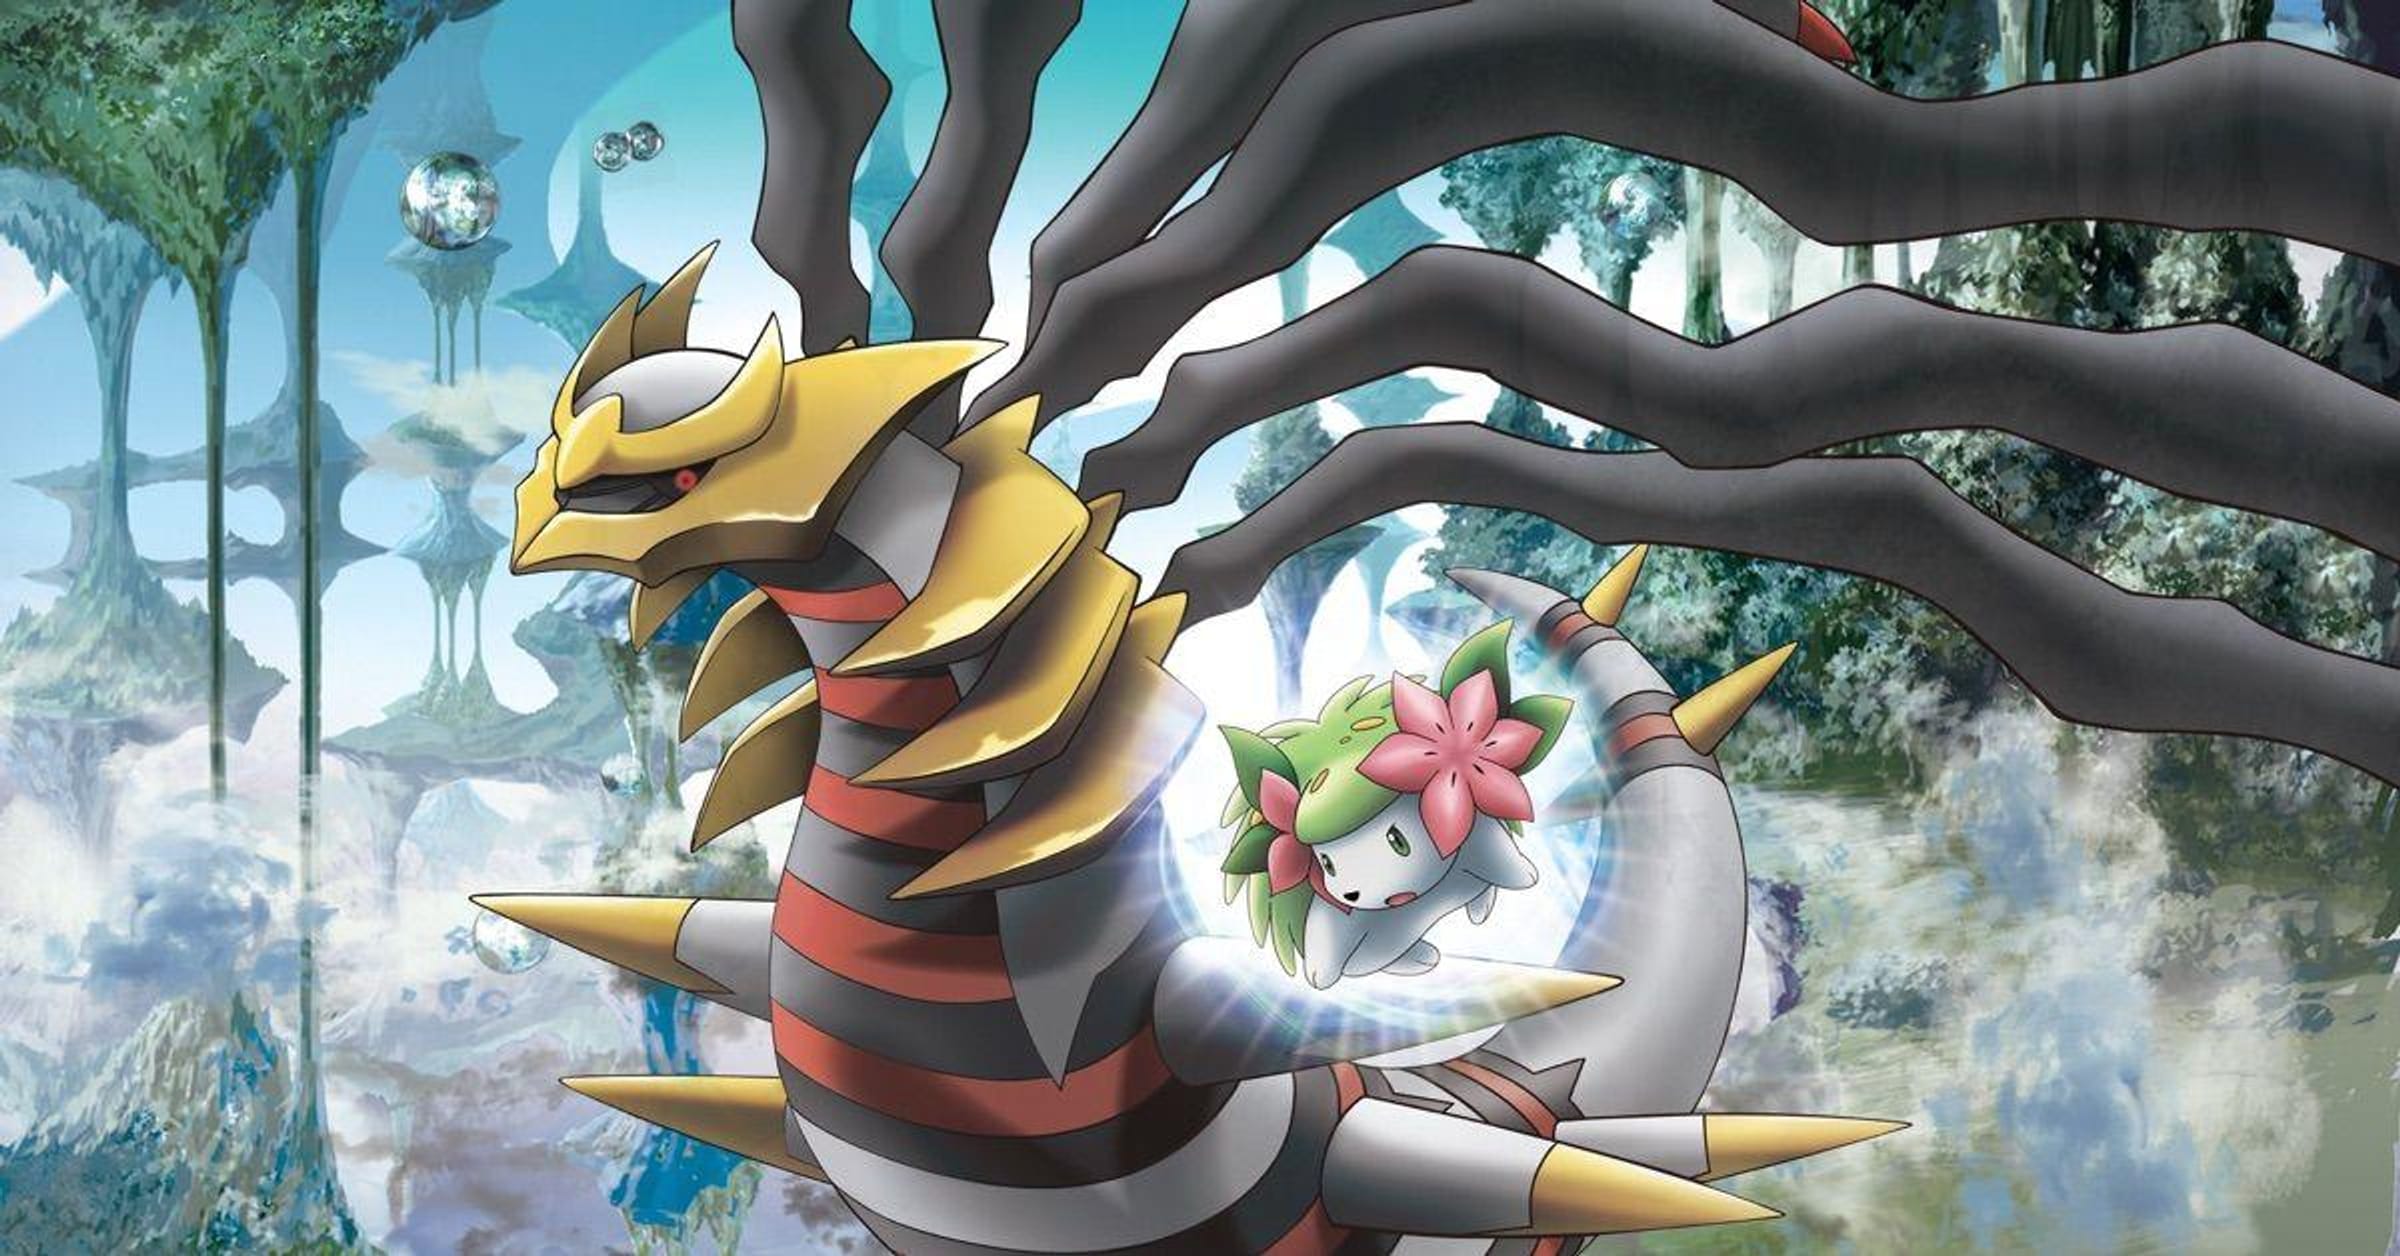 The 40+ Best Nicknames For Giratina, Ranked